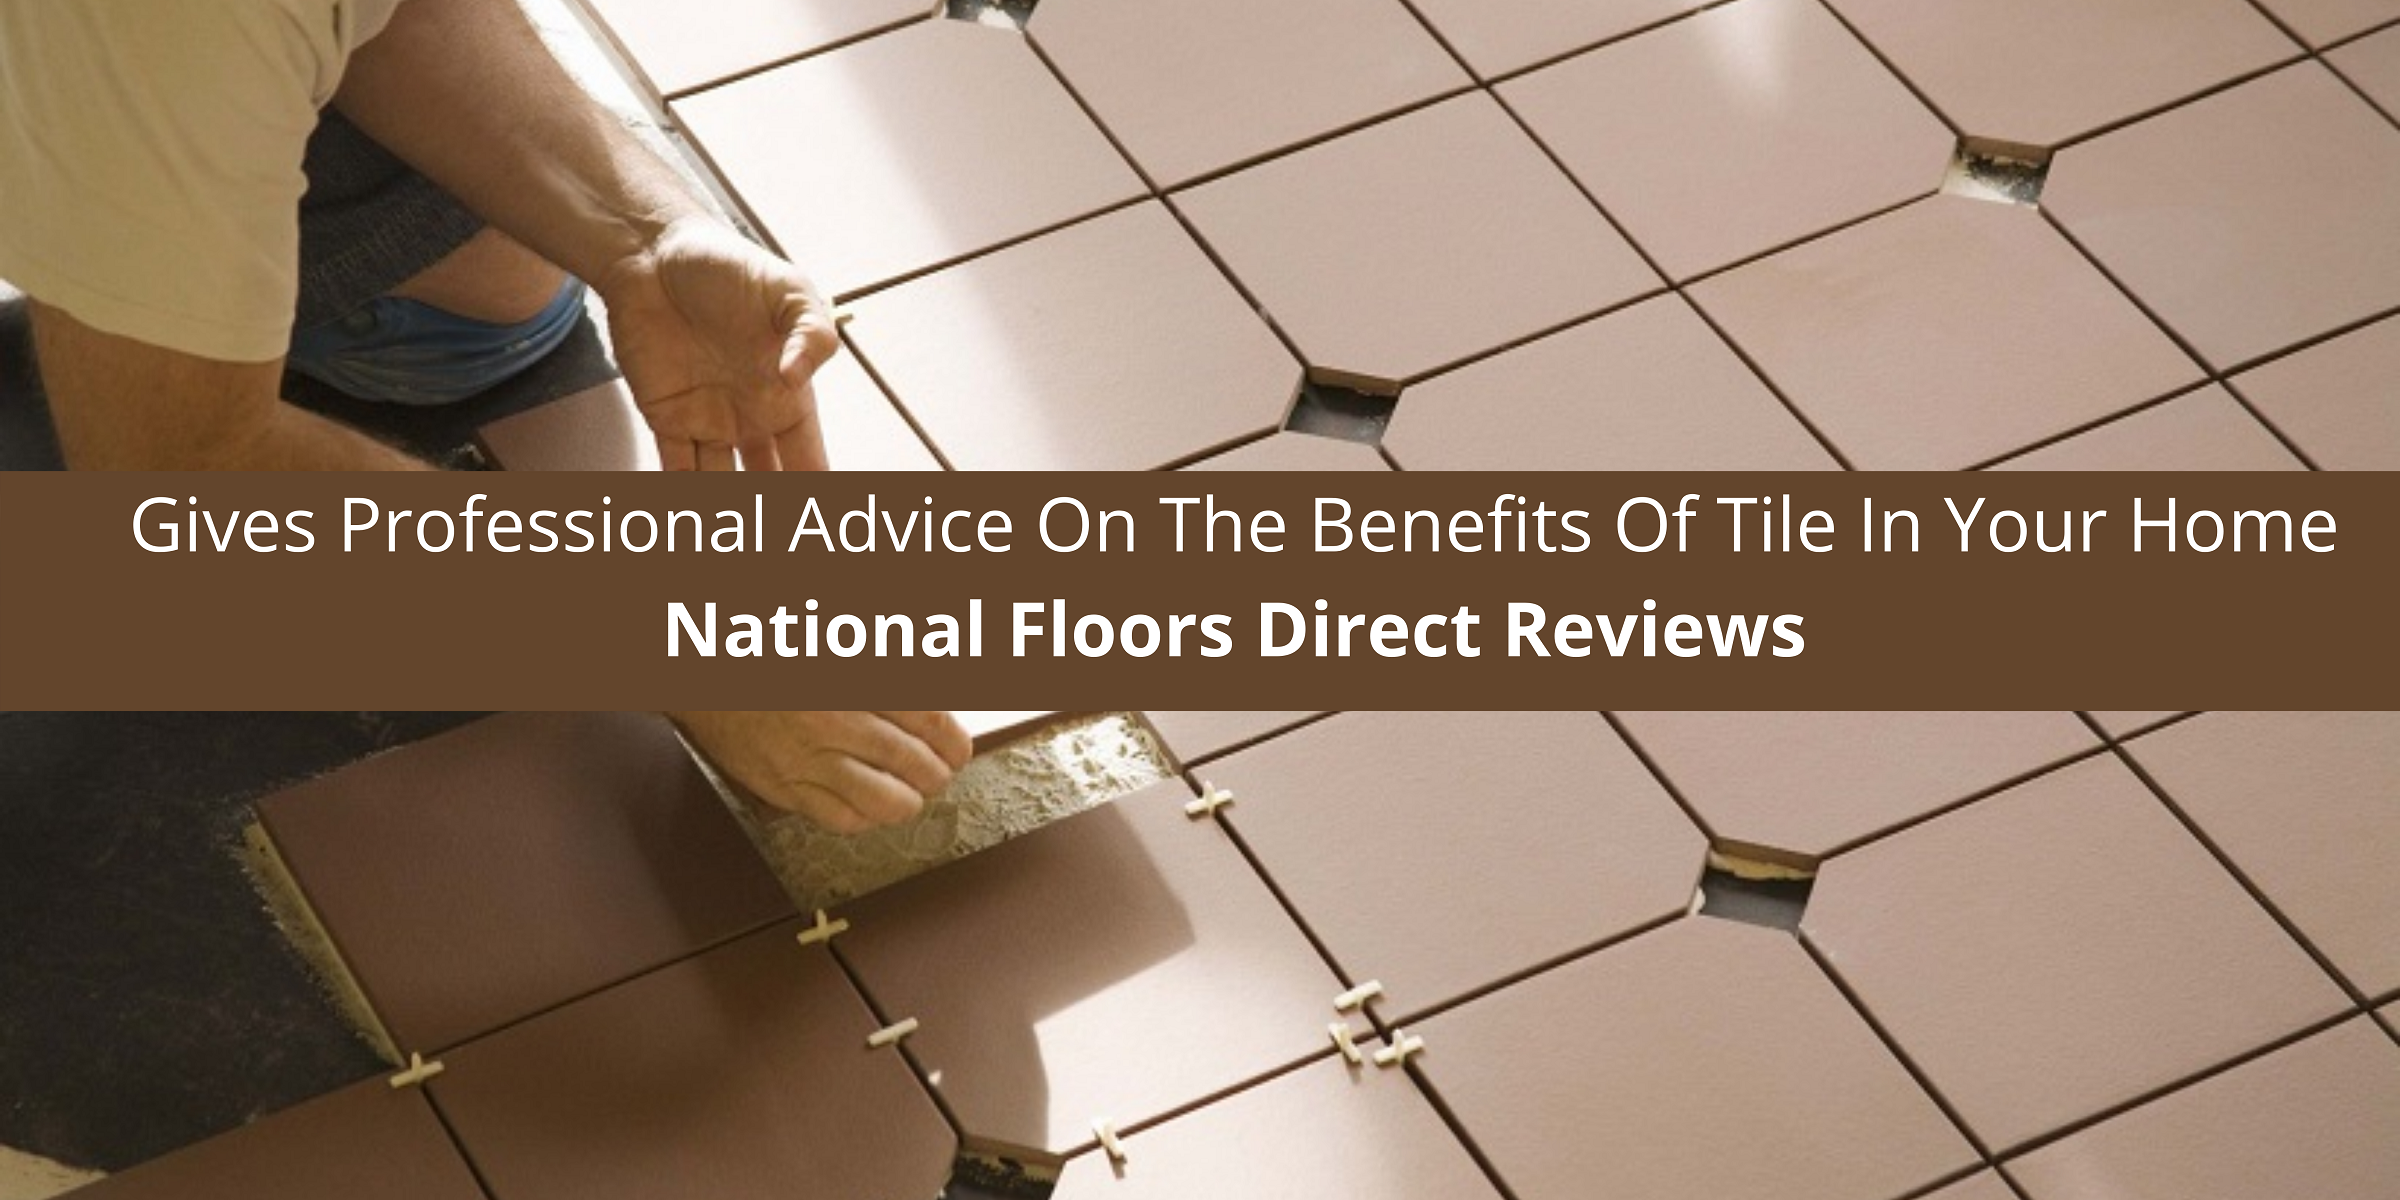 National Floors Direct Gives Professional Advice On The Benefits Of Tile In Your Home